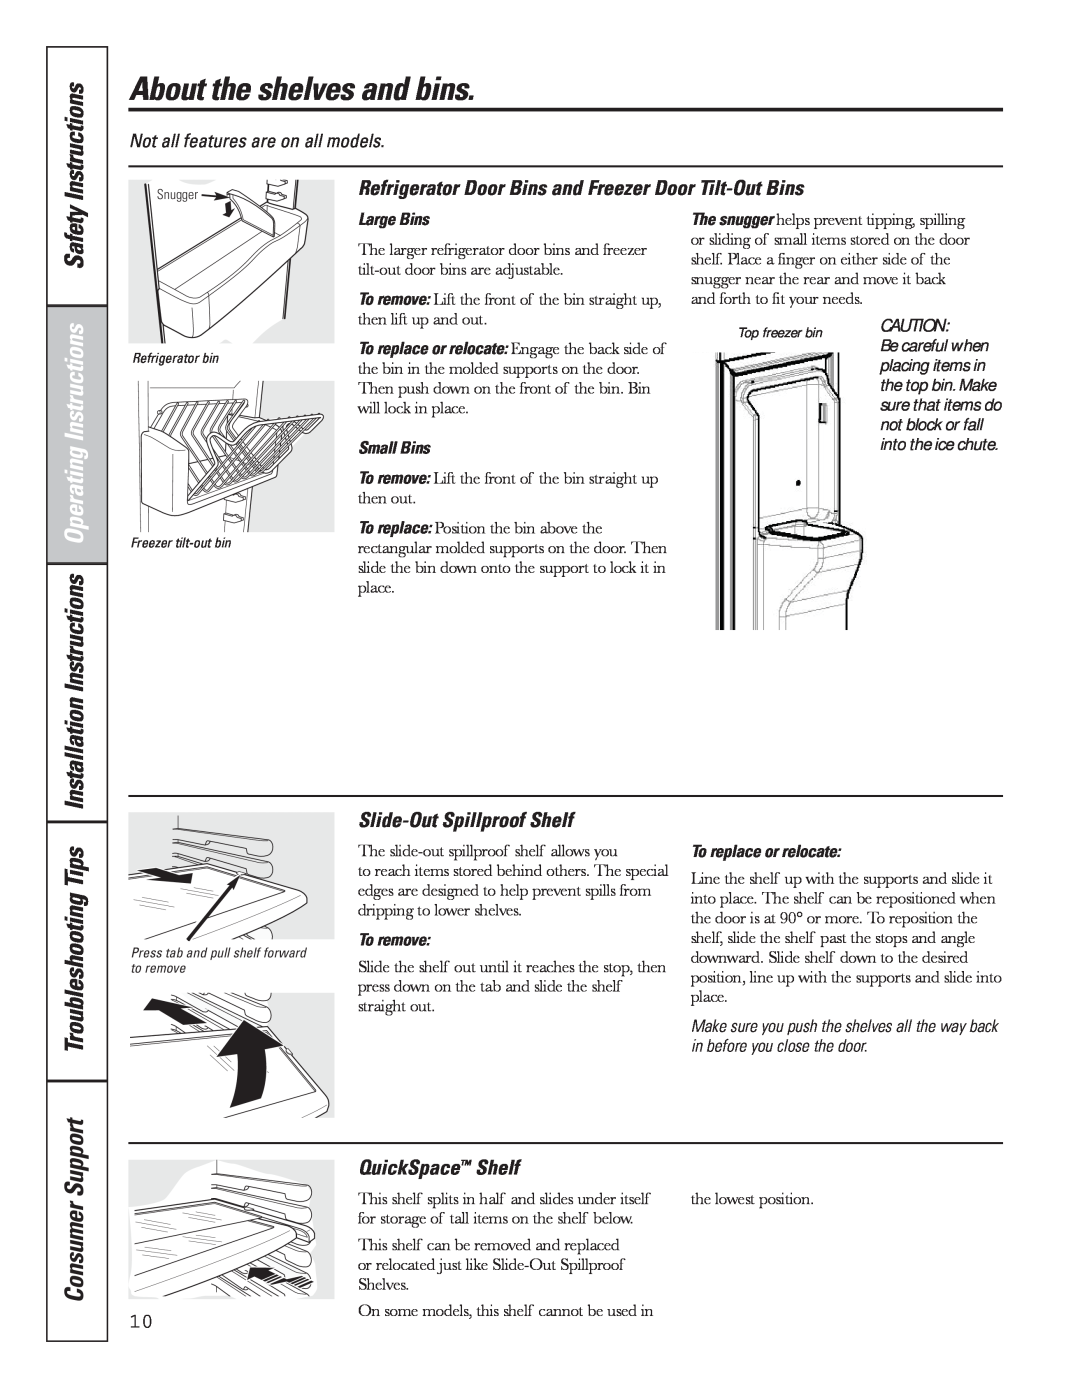 GE 49-60637 About the shelves and bins, Installation Instructions Operating Instructions Safety, Troubleshooting Tips 